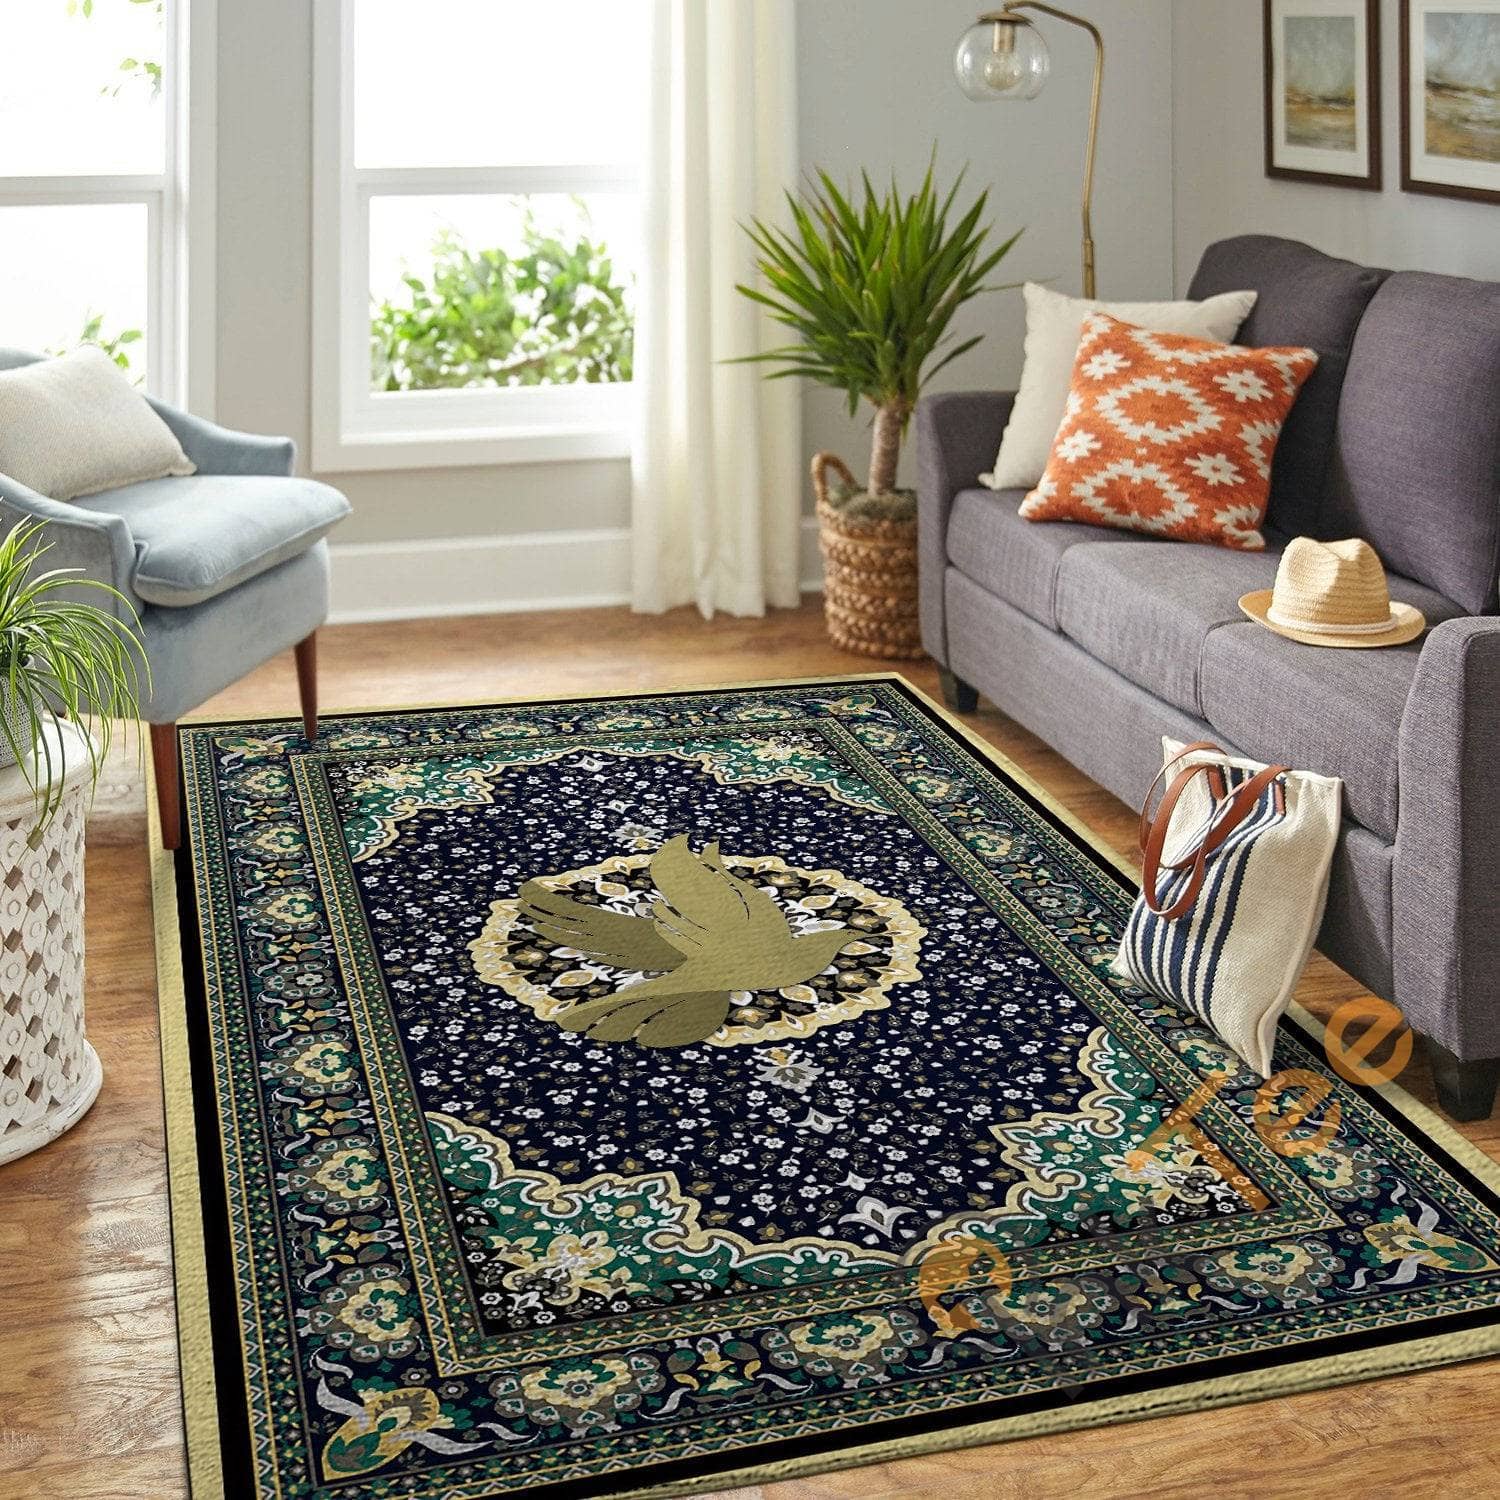 A Peace Dove With Luxurious Patterns Hippie Floor Decor Soft Living Room Bedroom Rug